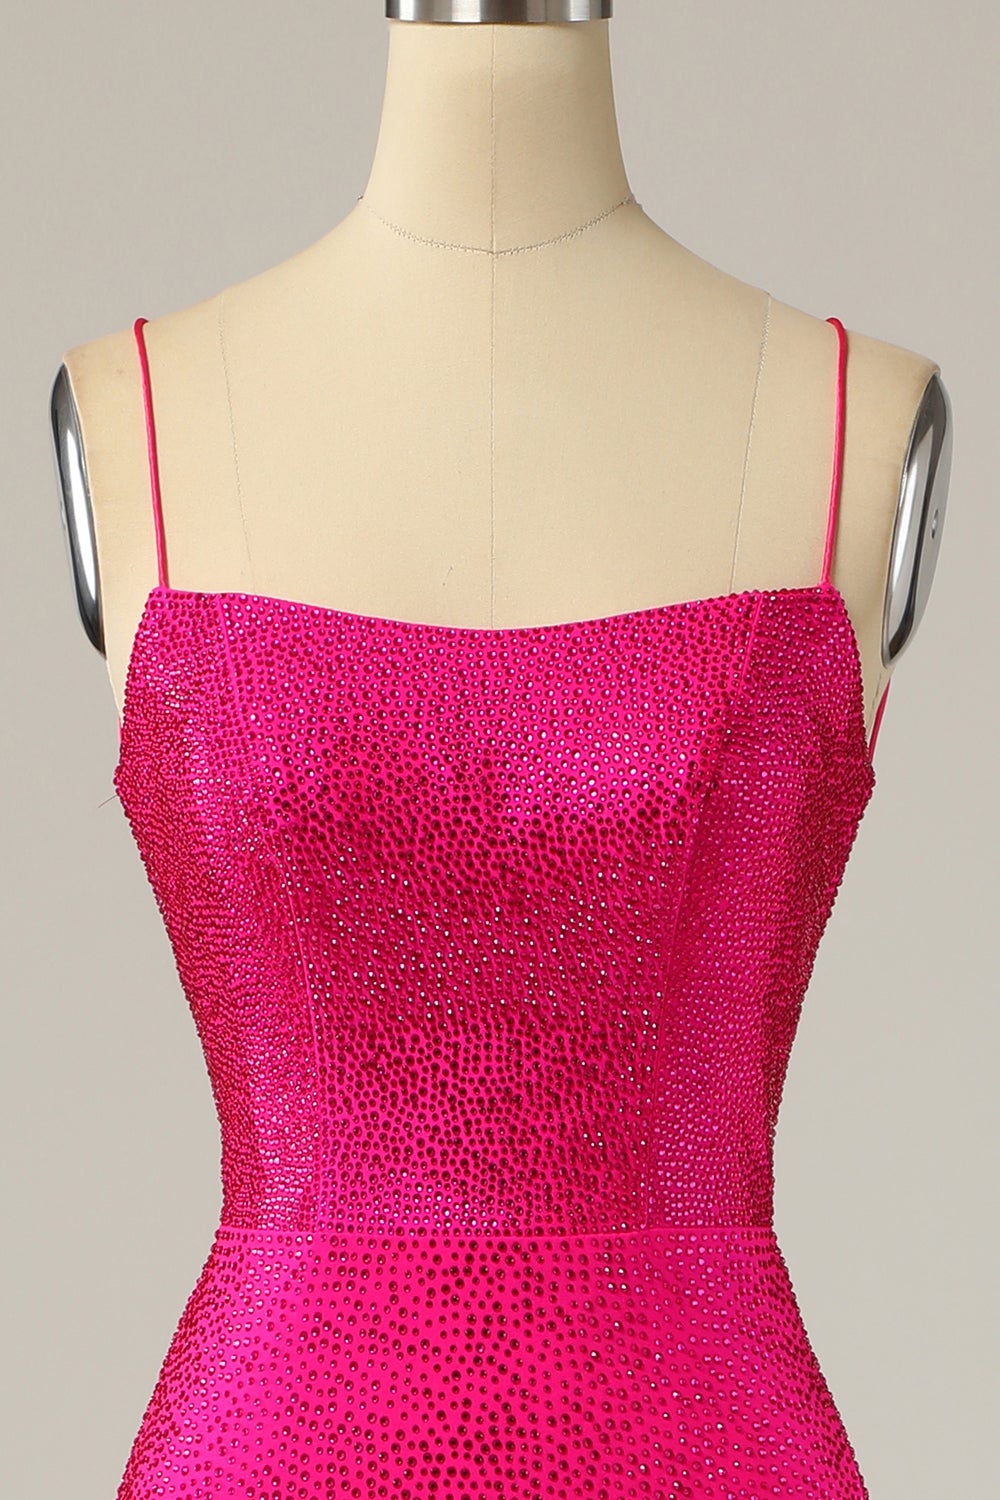 Party Dress Vintage, Mermaid Spaghetti Straps Hot Pink Sequins Long Prom Dress